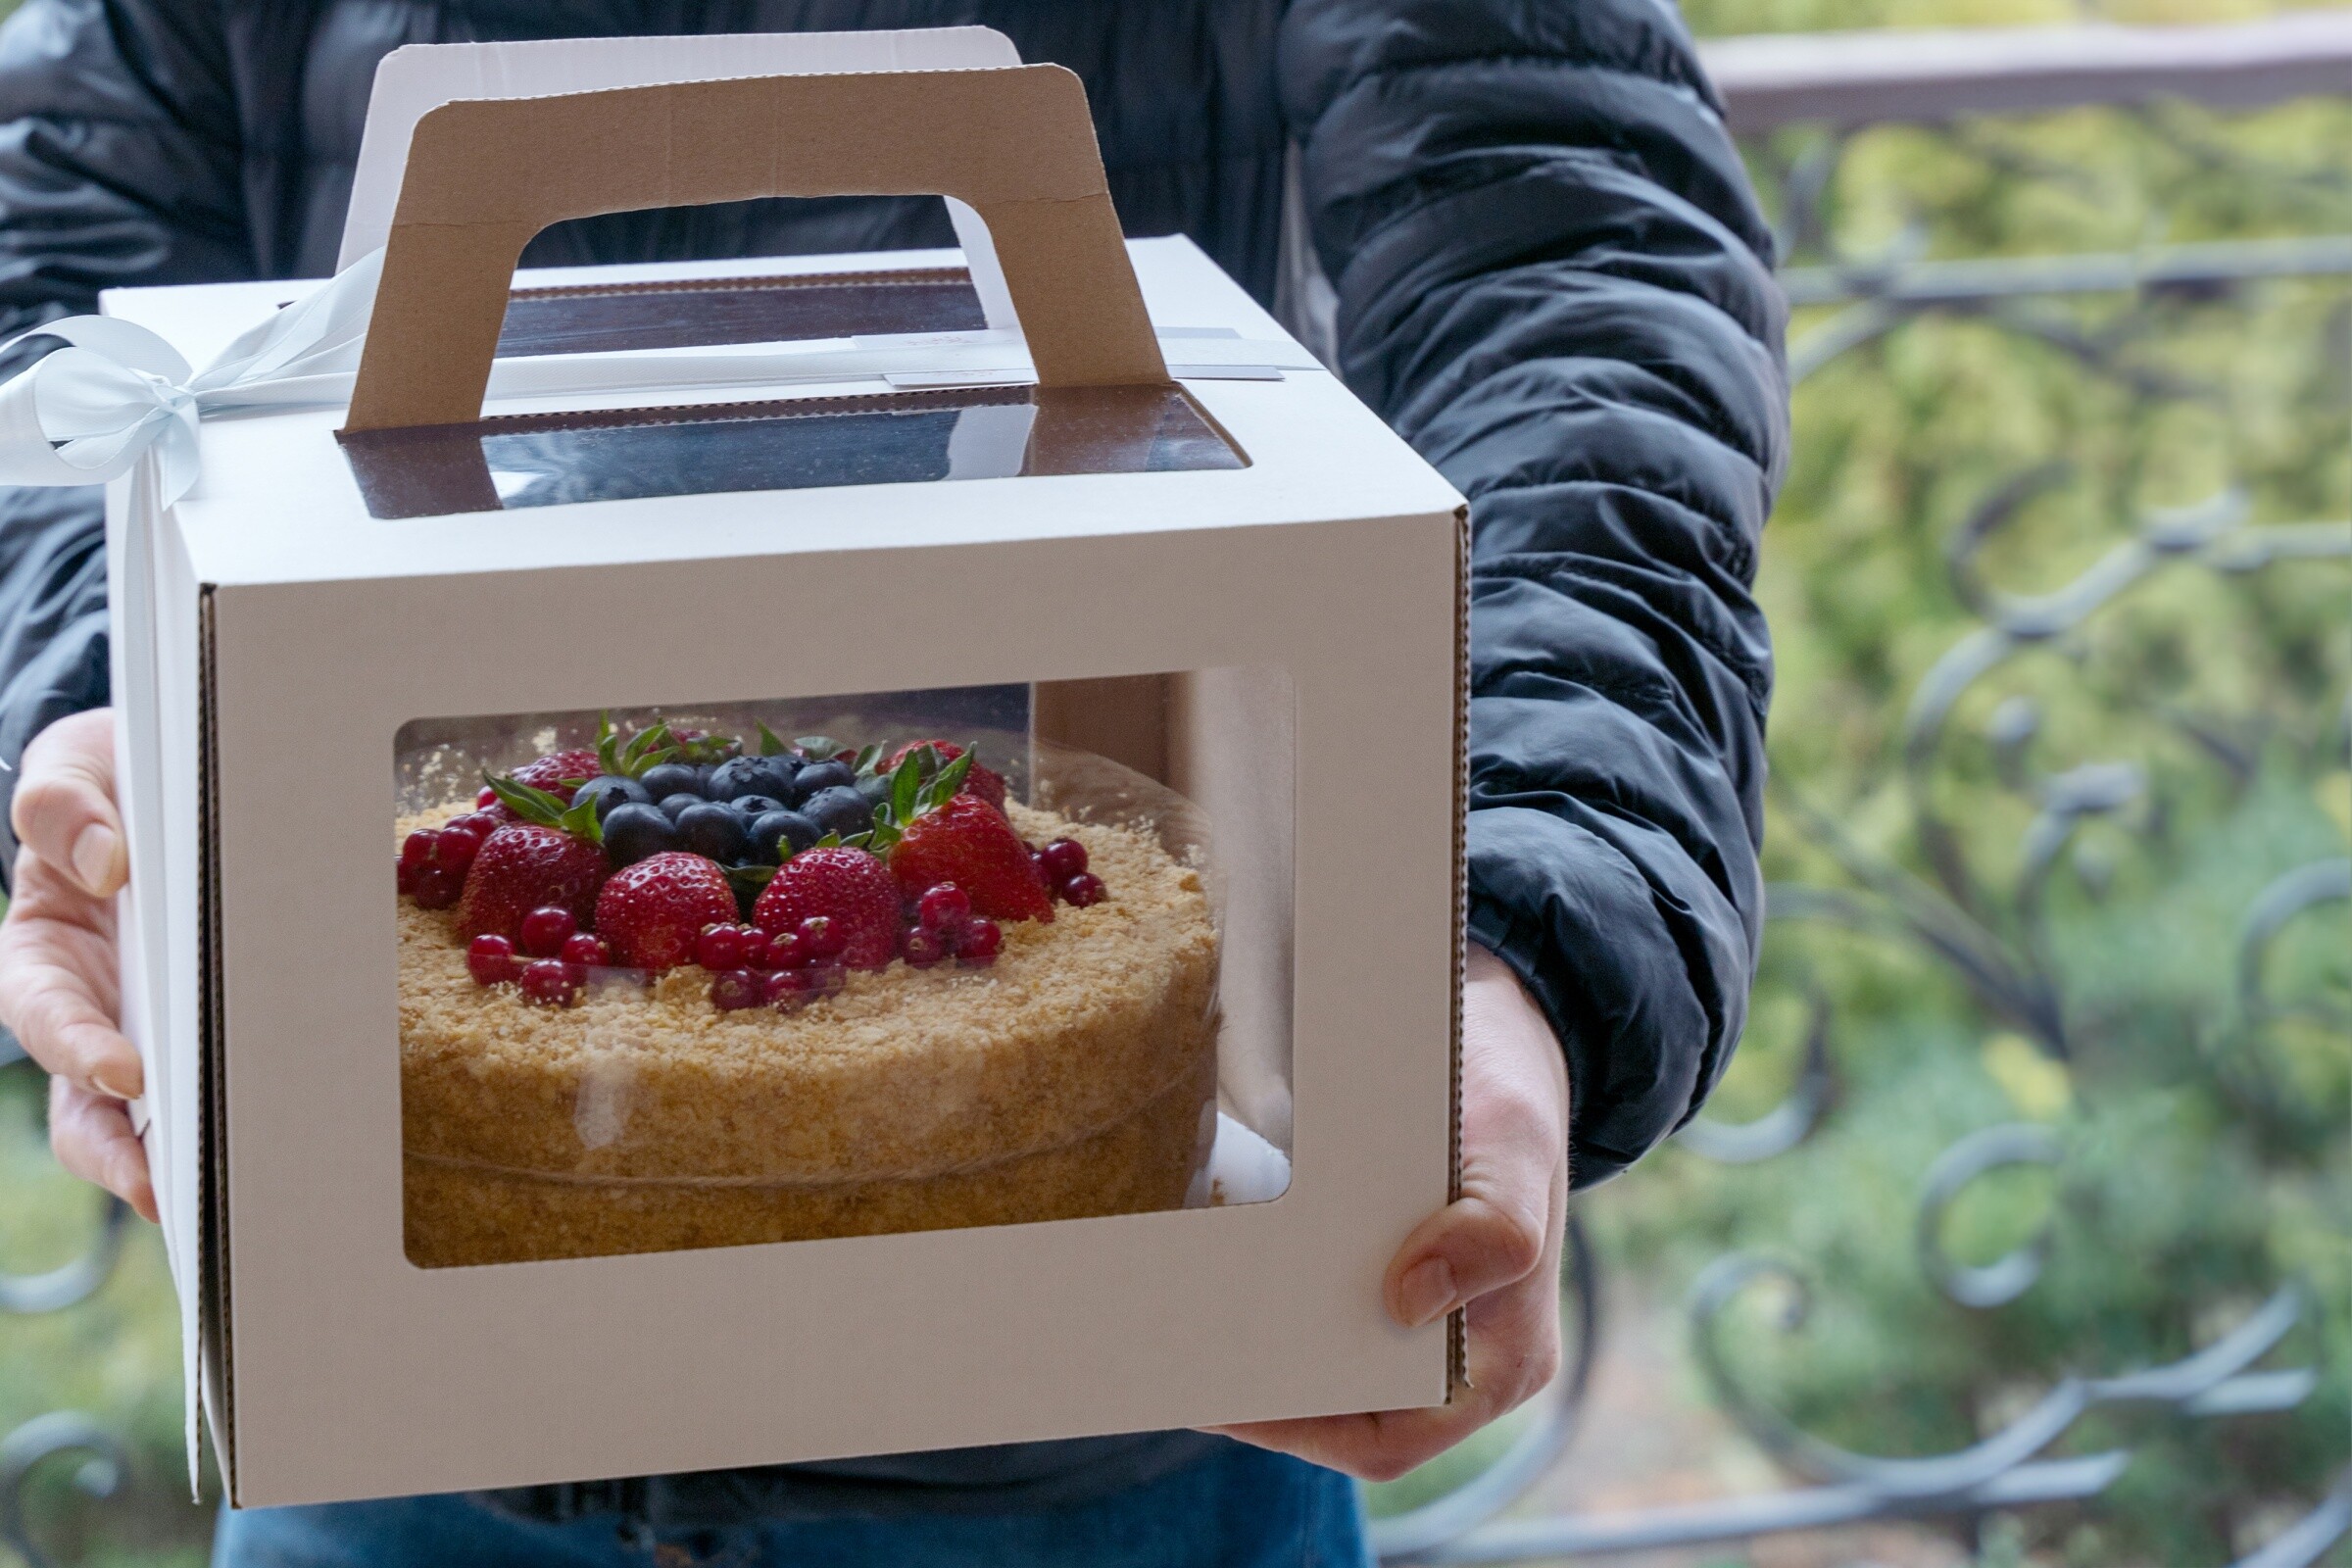 A man delivering a cake with berries on top.